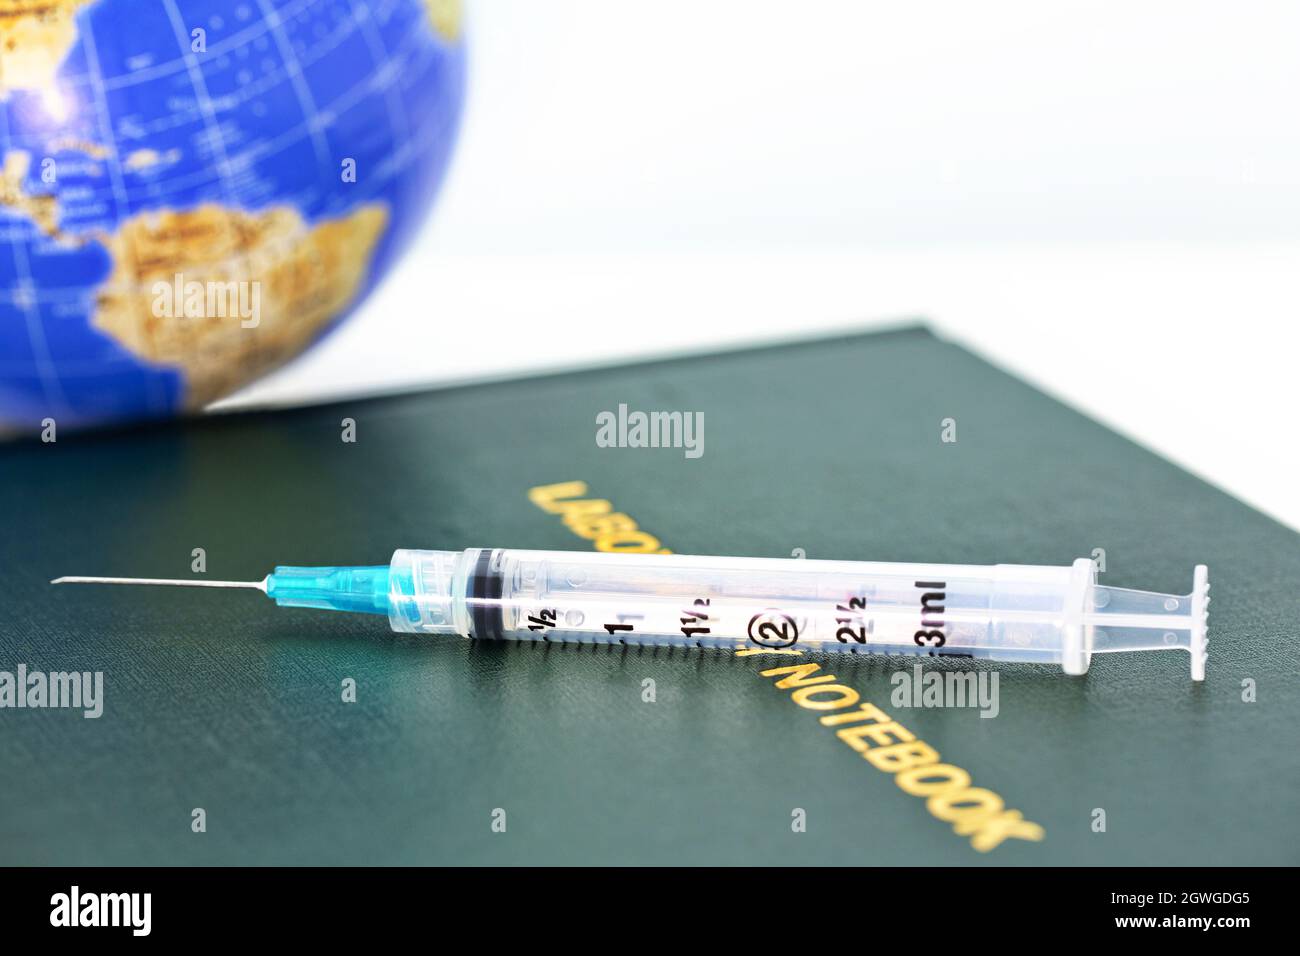 Injection needle placed with Lab Notebook and globe reflect worldwide nature of public health, medicine, pandemics, and healthcare industry Stock Photo